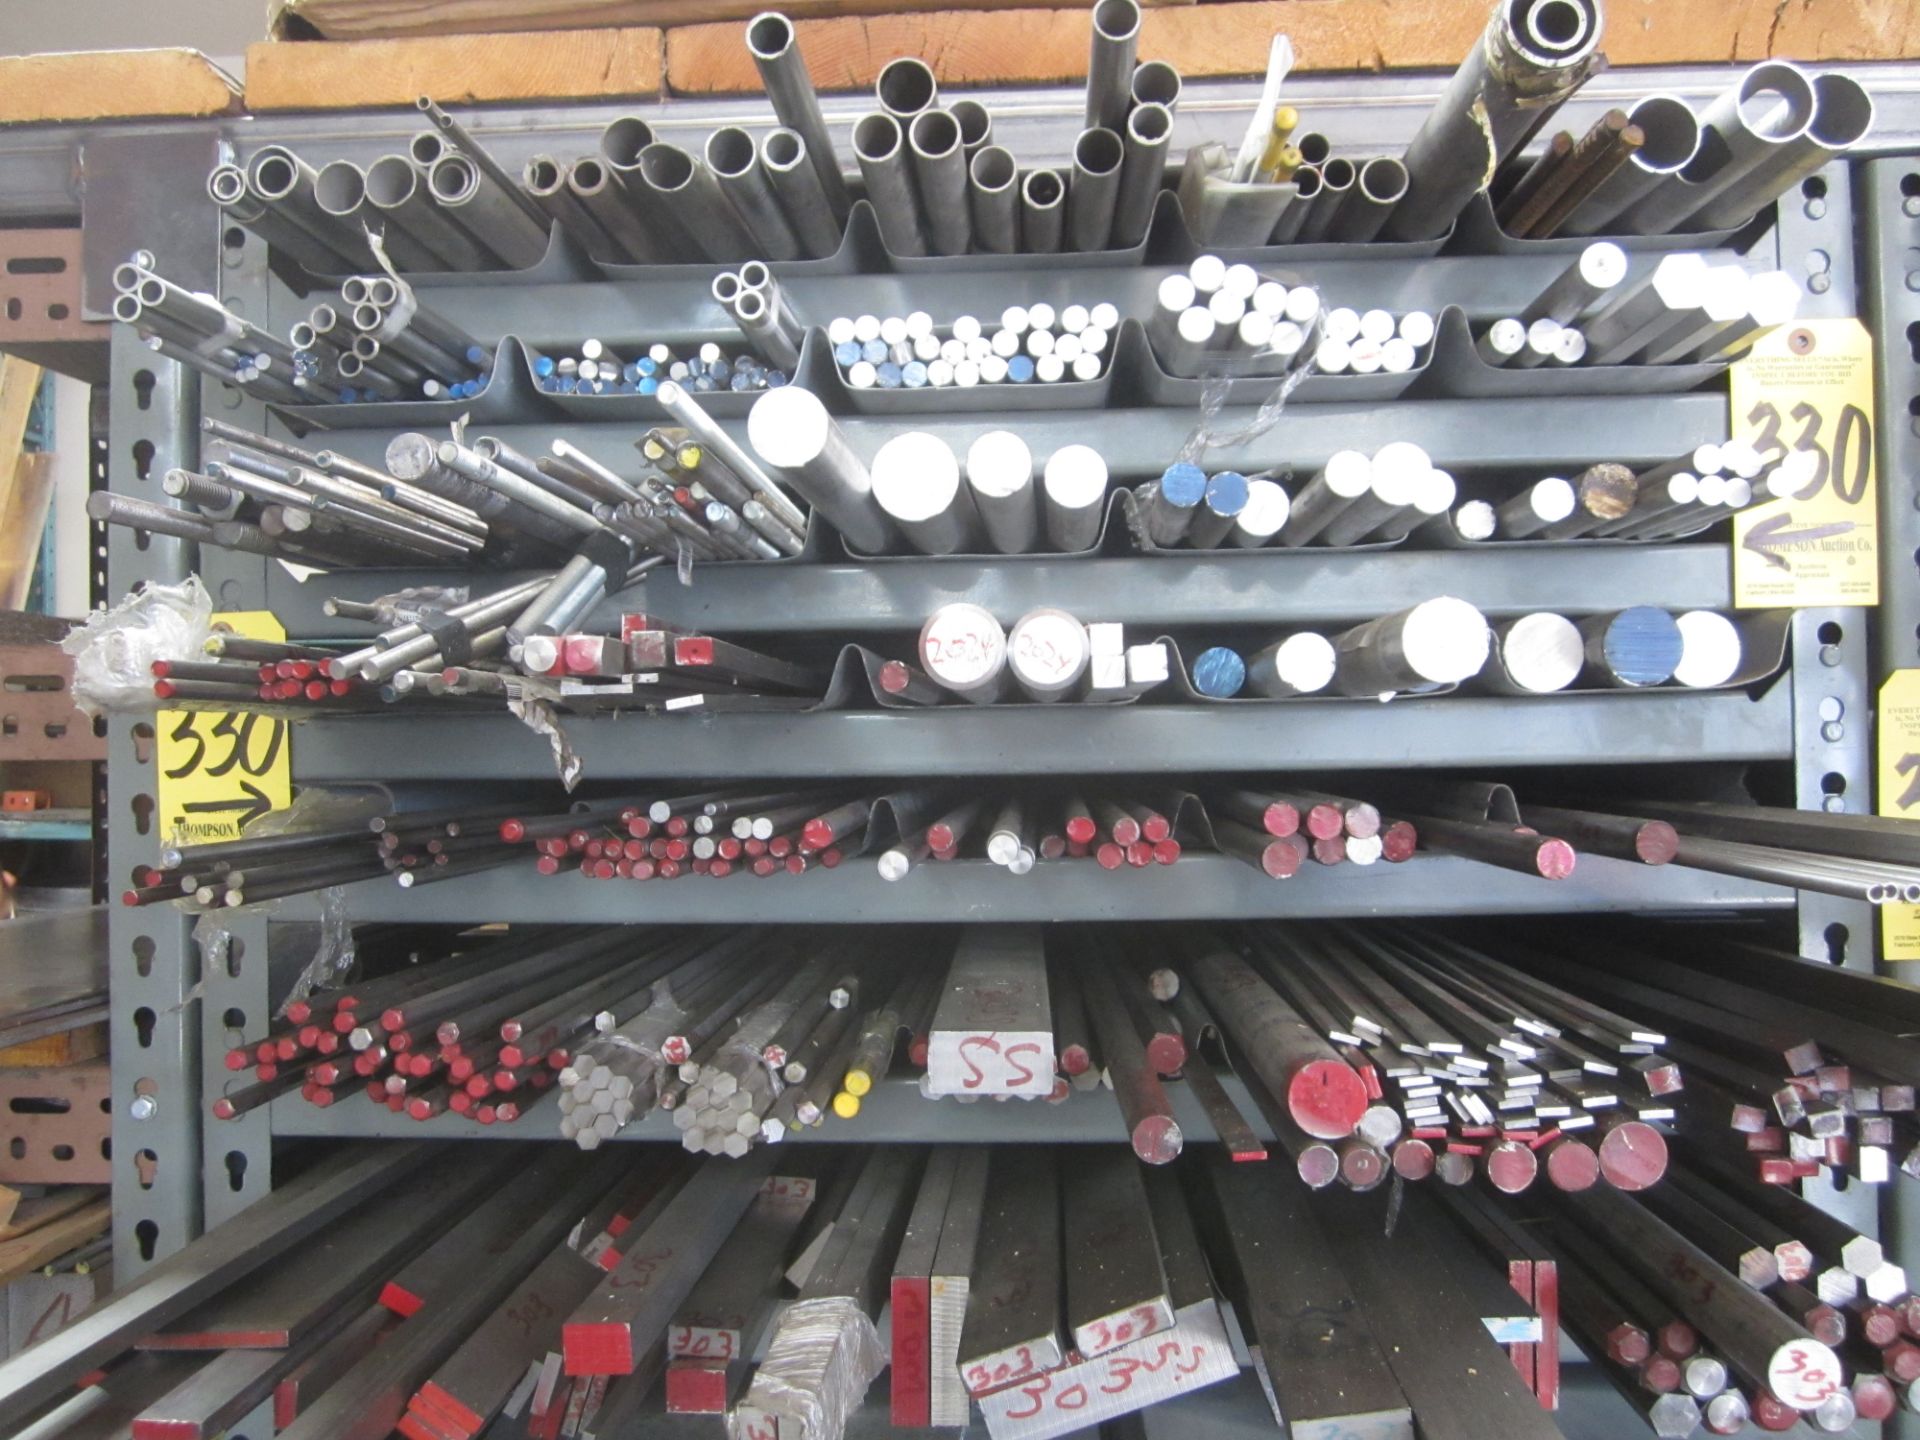 Storage Rack and Contents Including Aluminum and Stainless Steel Round Bar, Flat Bar, Tubing and - Image 2 of 4